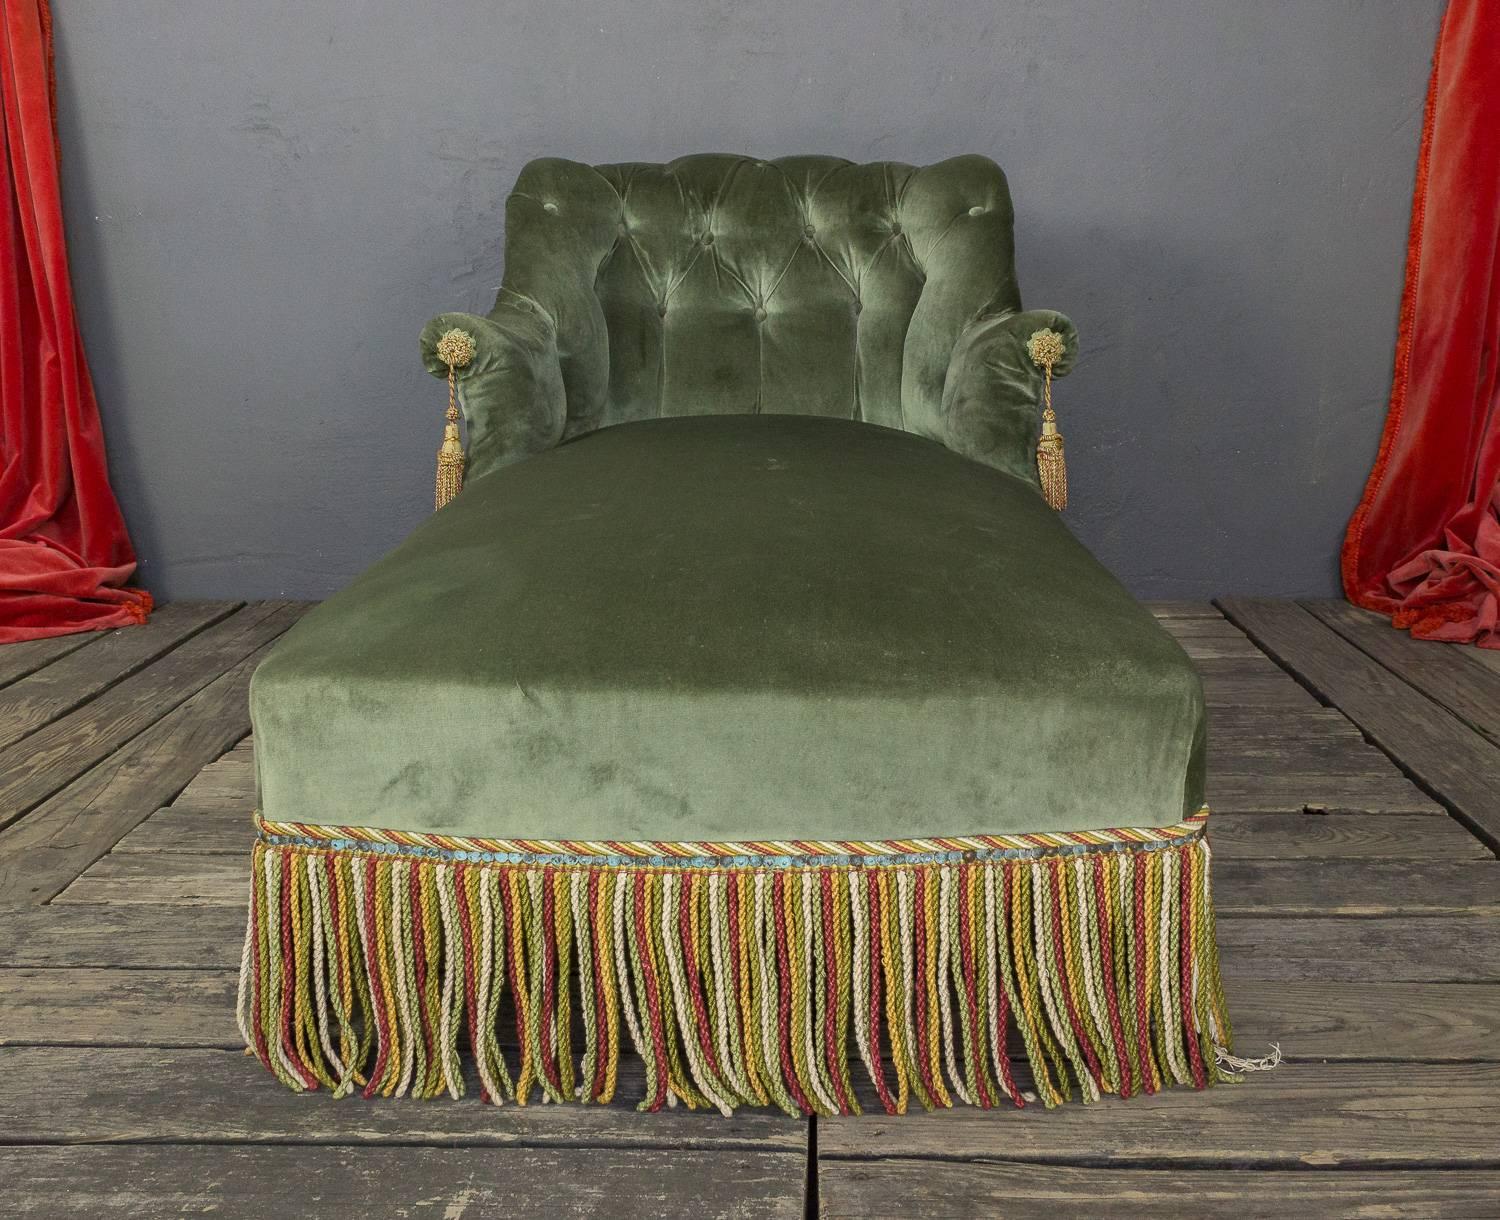 Low back French 19th century chaise longue in green velvet with contrasting bullion fringe. This item is sold in 